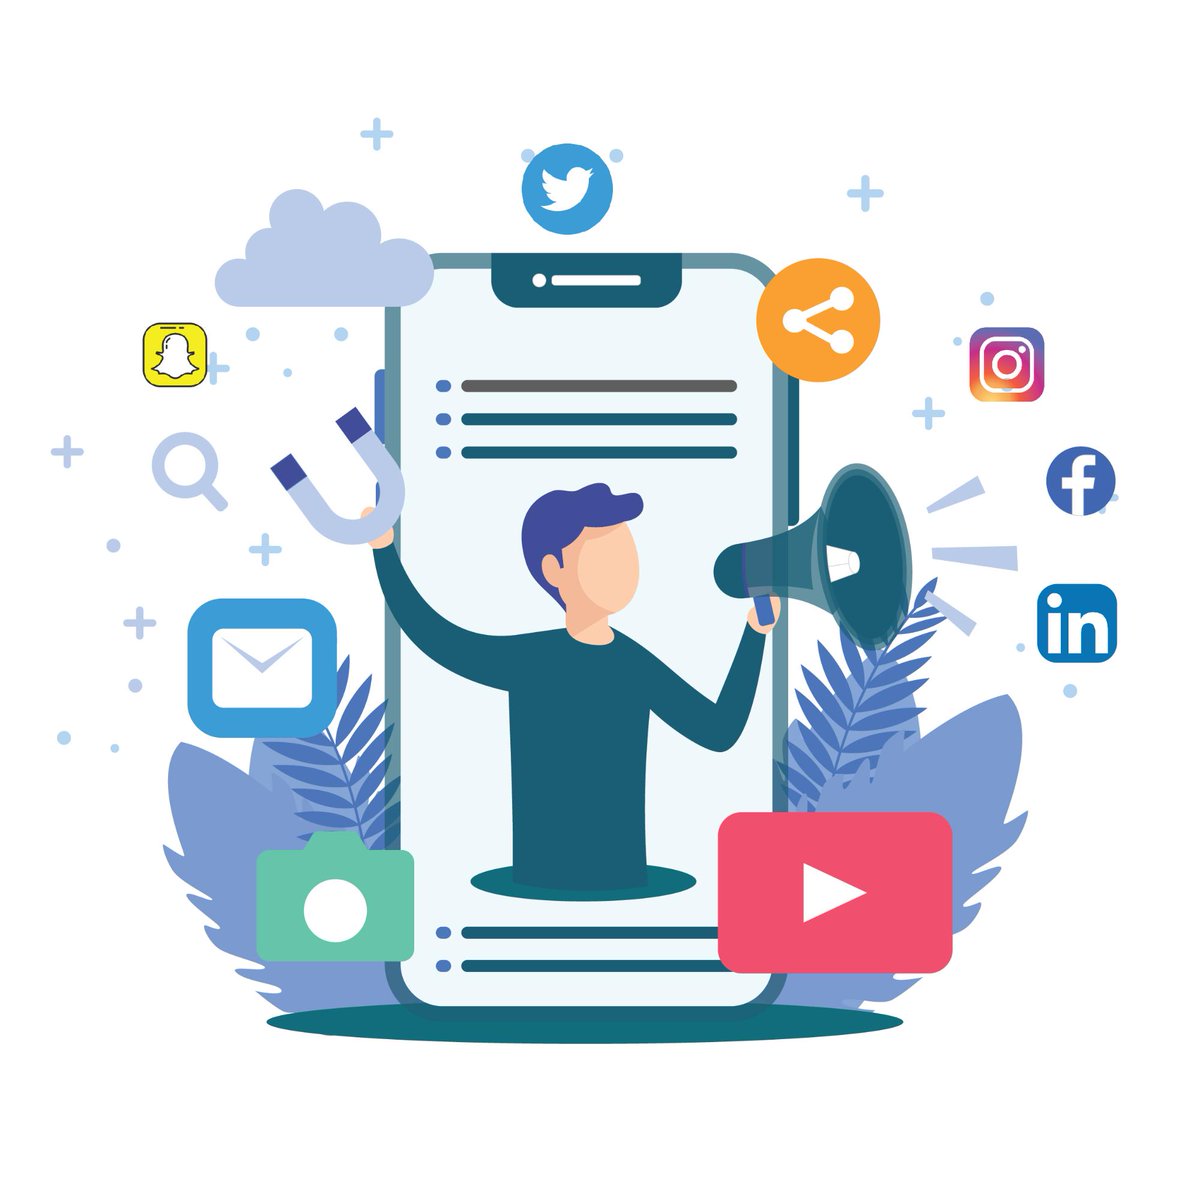 Create demand for your products and services long before your target audience is faced with a buying decision. With a strong social strategy, you build trust and brand loyalty with your customers. leadshawk.net #socialstrategy #socialmediamarketing